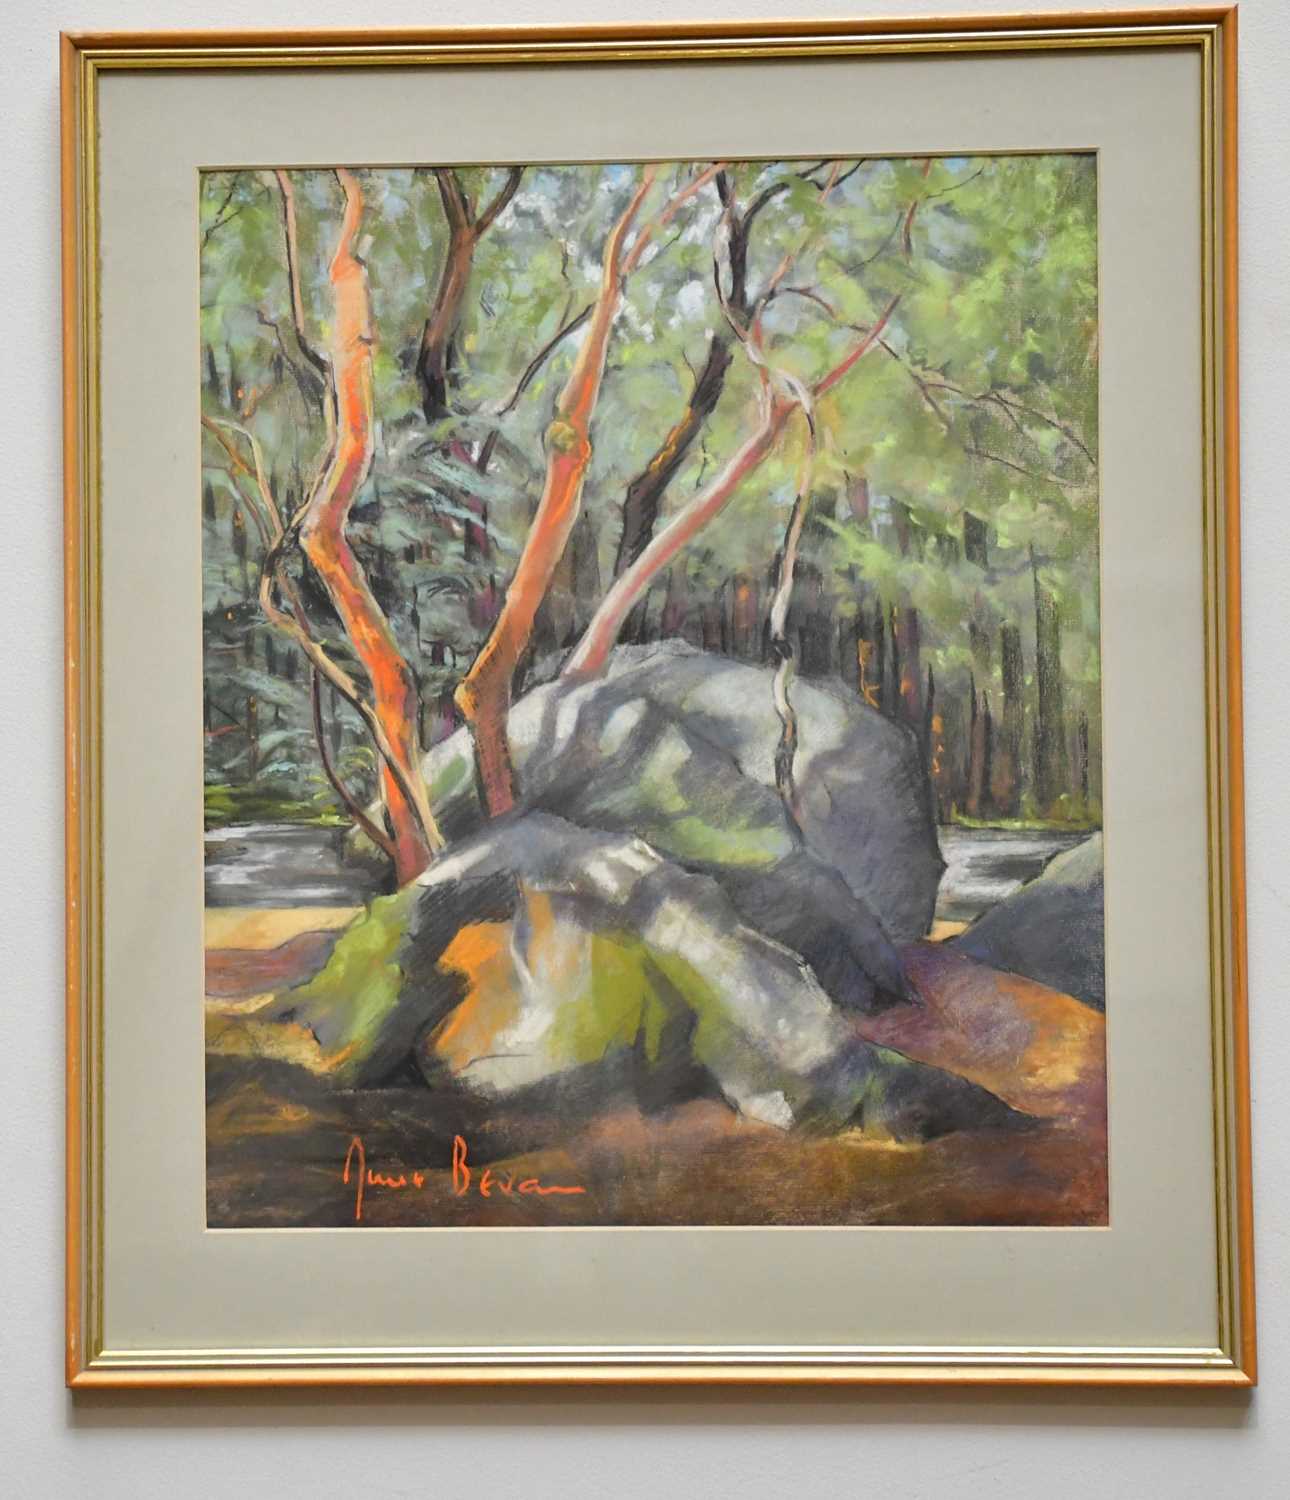 † JUNE BEVAN; pastel, 'Please Move Work with Extreme Care', signed lower left, [ ***please insert***